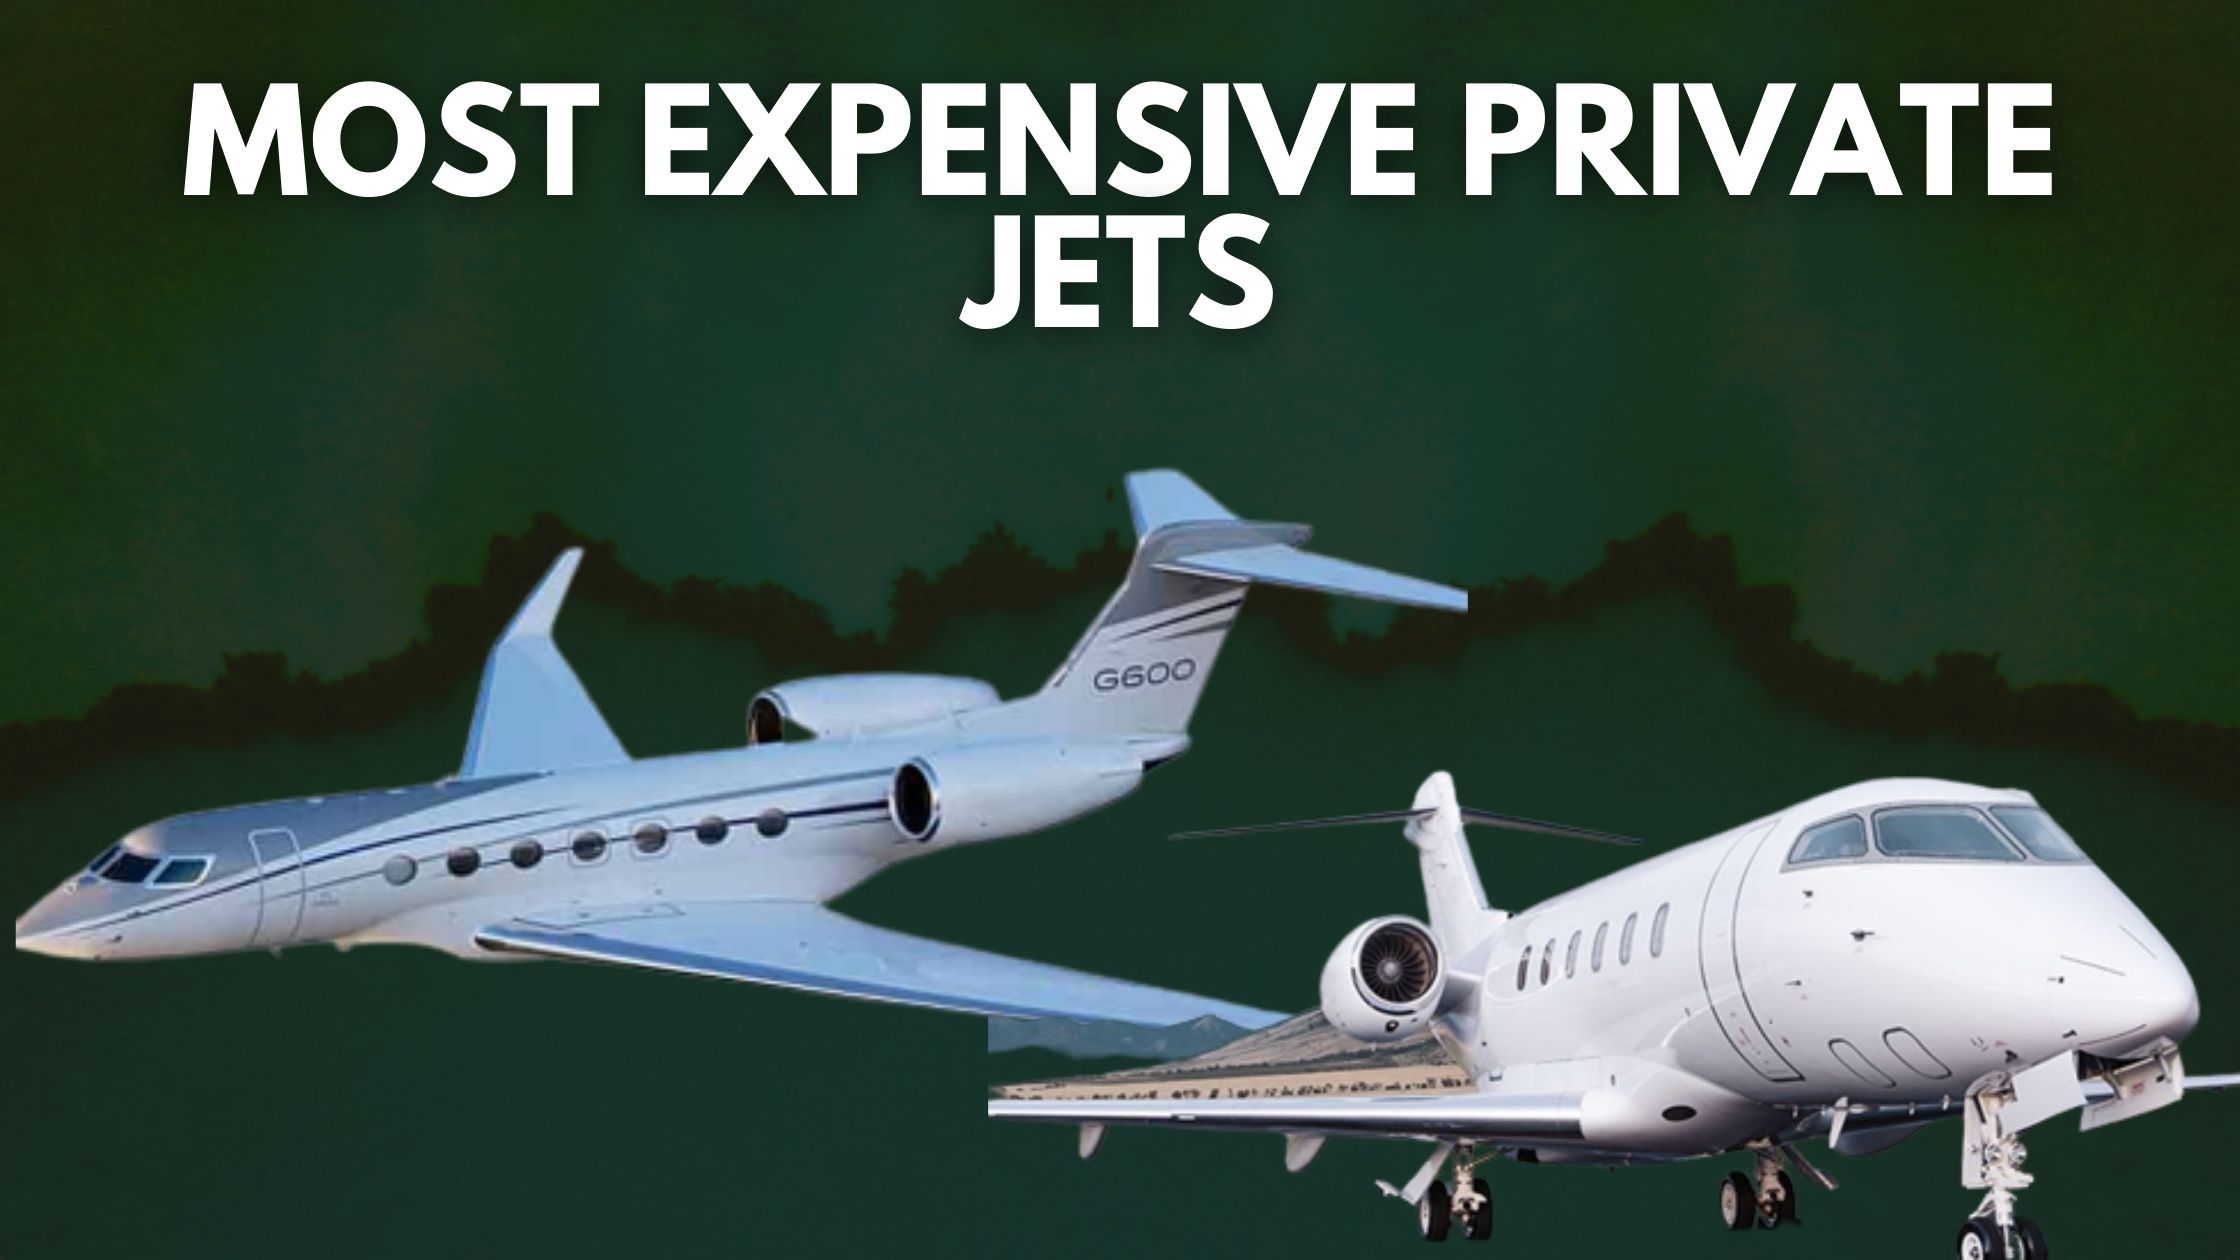 Top 10 Most Expensive Private Jets In The World (2022)